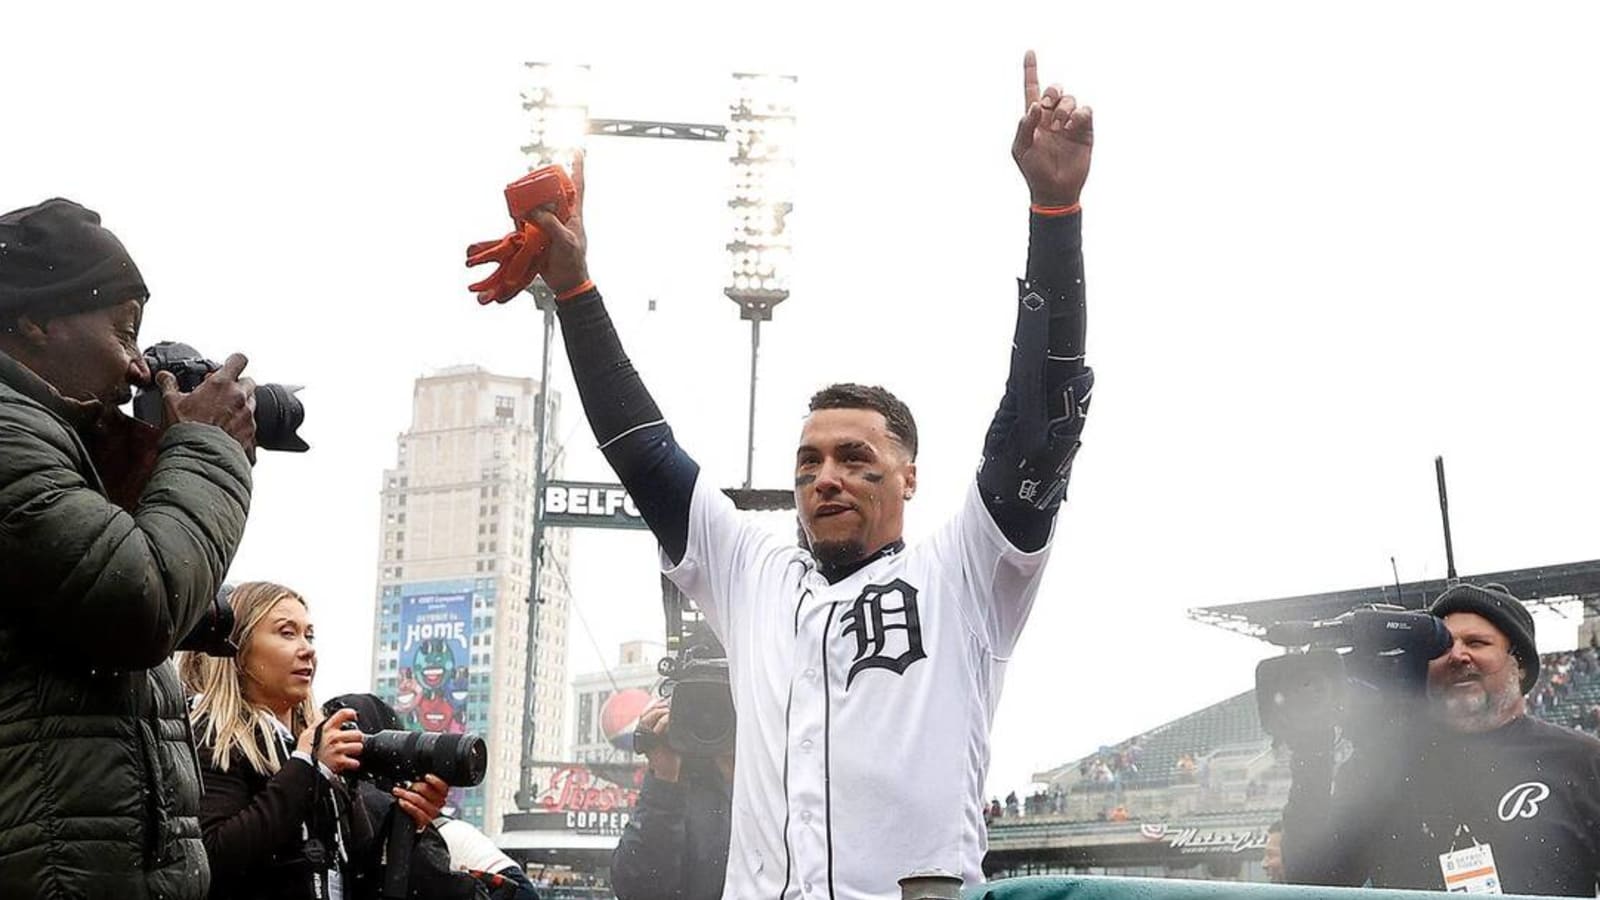 Tigers beat White Sox on controversial walk-off play